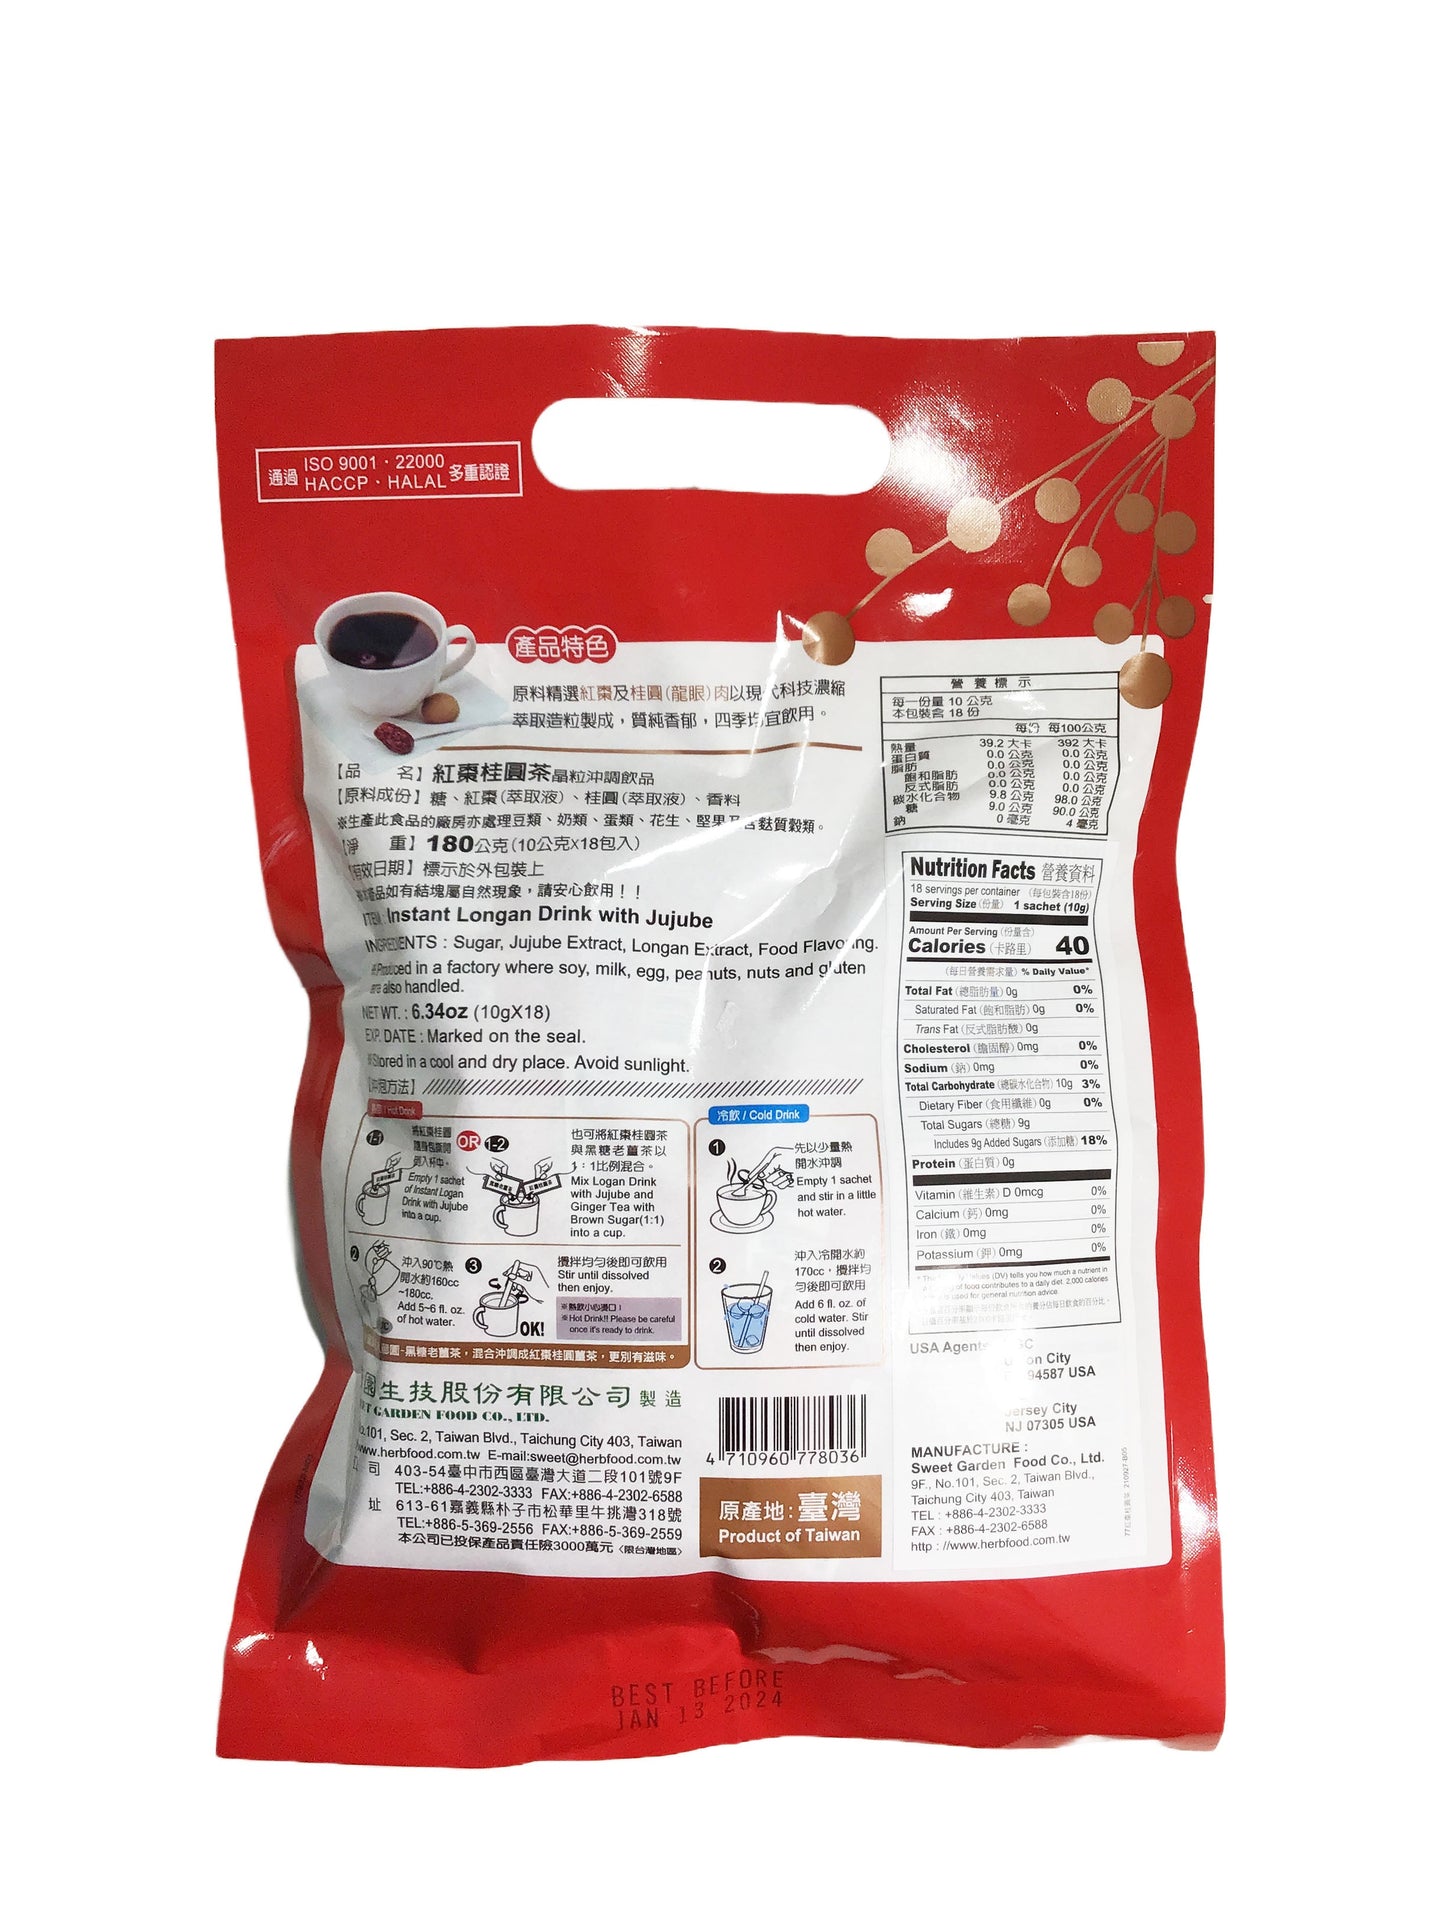 SWEET GARDEN Instant Longan Drink with Jujube 薌園紅棗桂圓茶, 18 Sachets